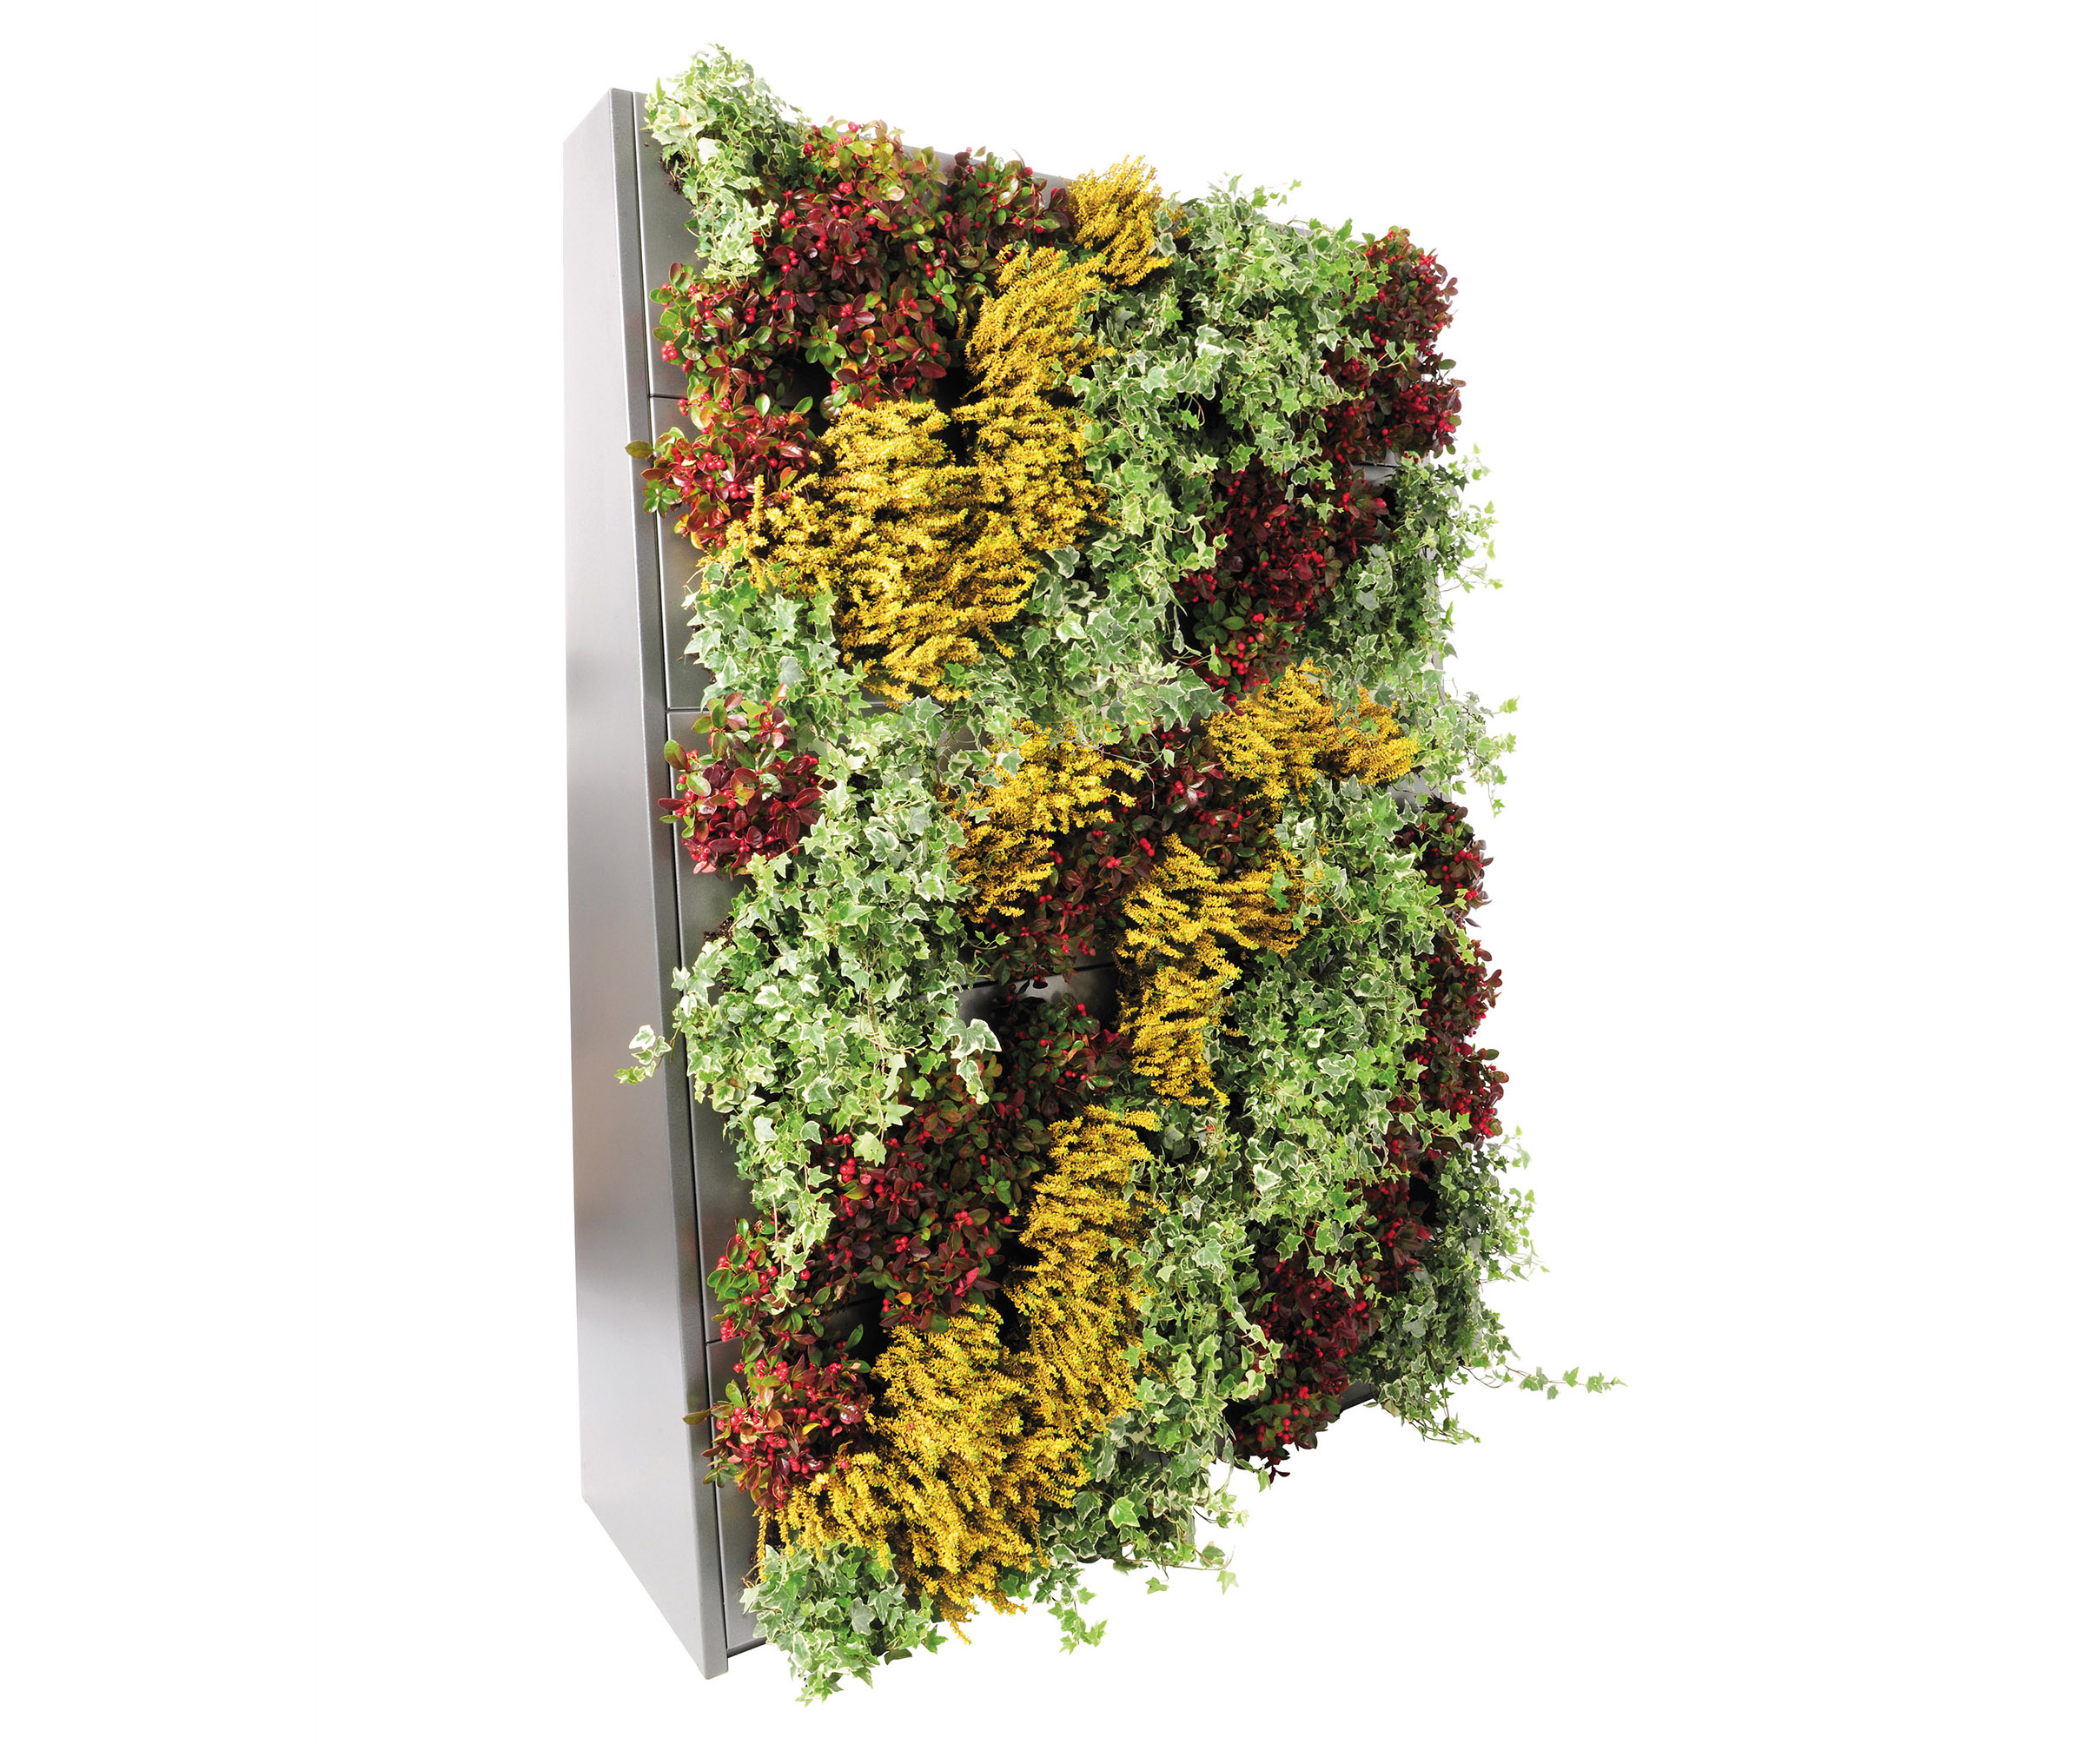 The new Eva vertical gardens from Richard Brink create completely new green spaces both indoors and outdoors, and thanks to their vertical design, they do this even where there would otherwise not be enough space for greenery.